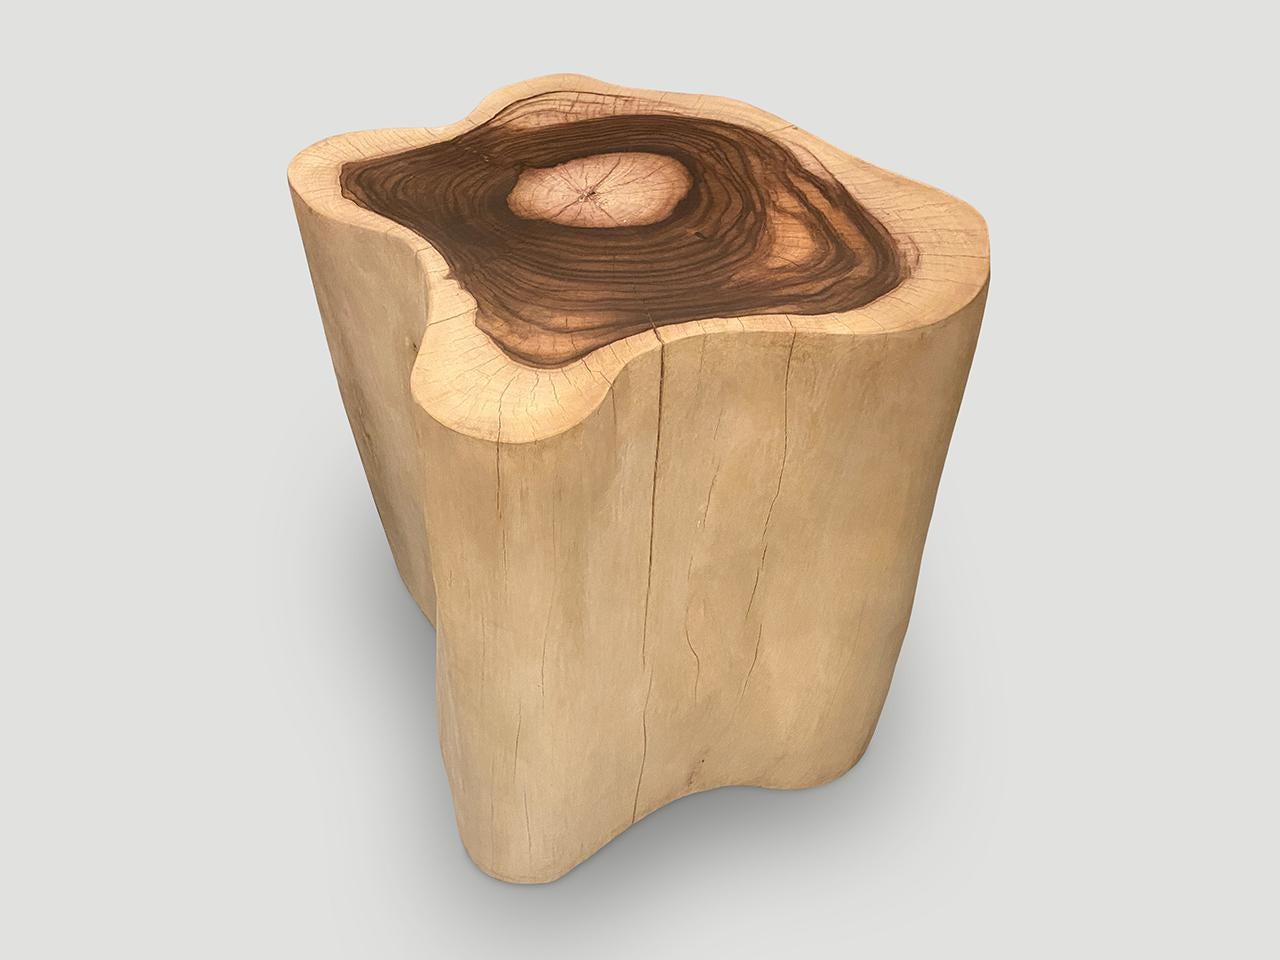 Organic Modern Andrianna Shamaris Rare Sono Wood Oversized Side Table or Pedestal For Sale